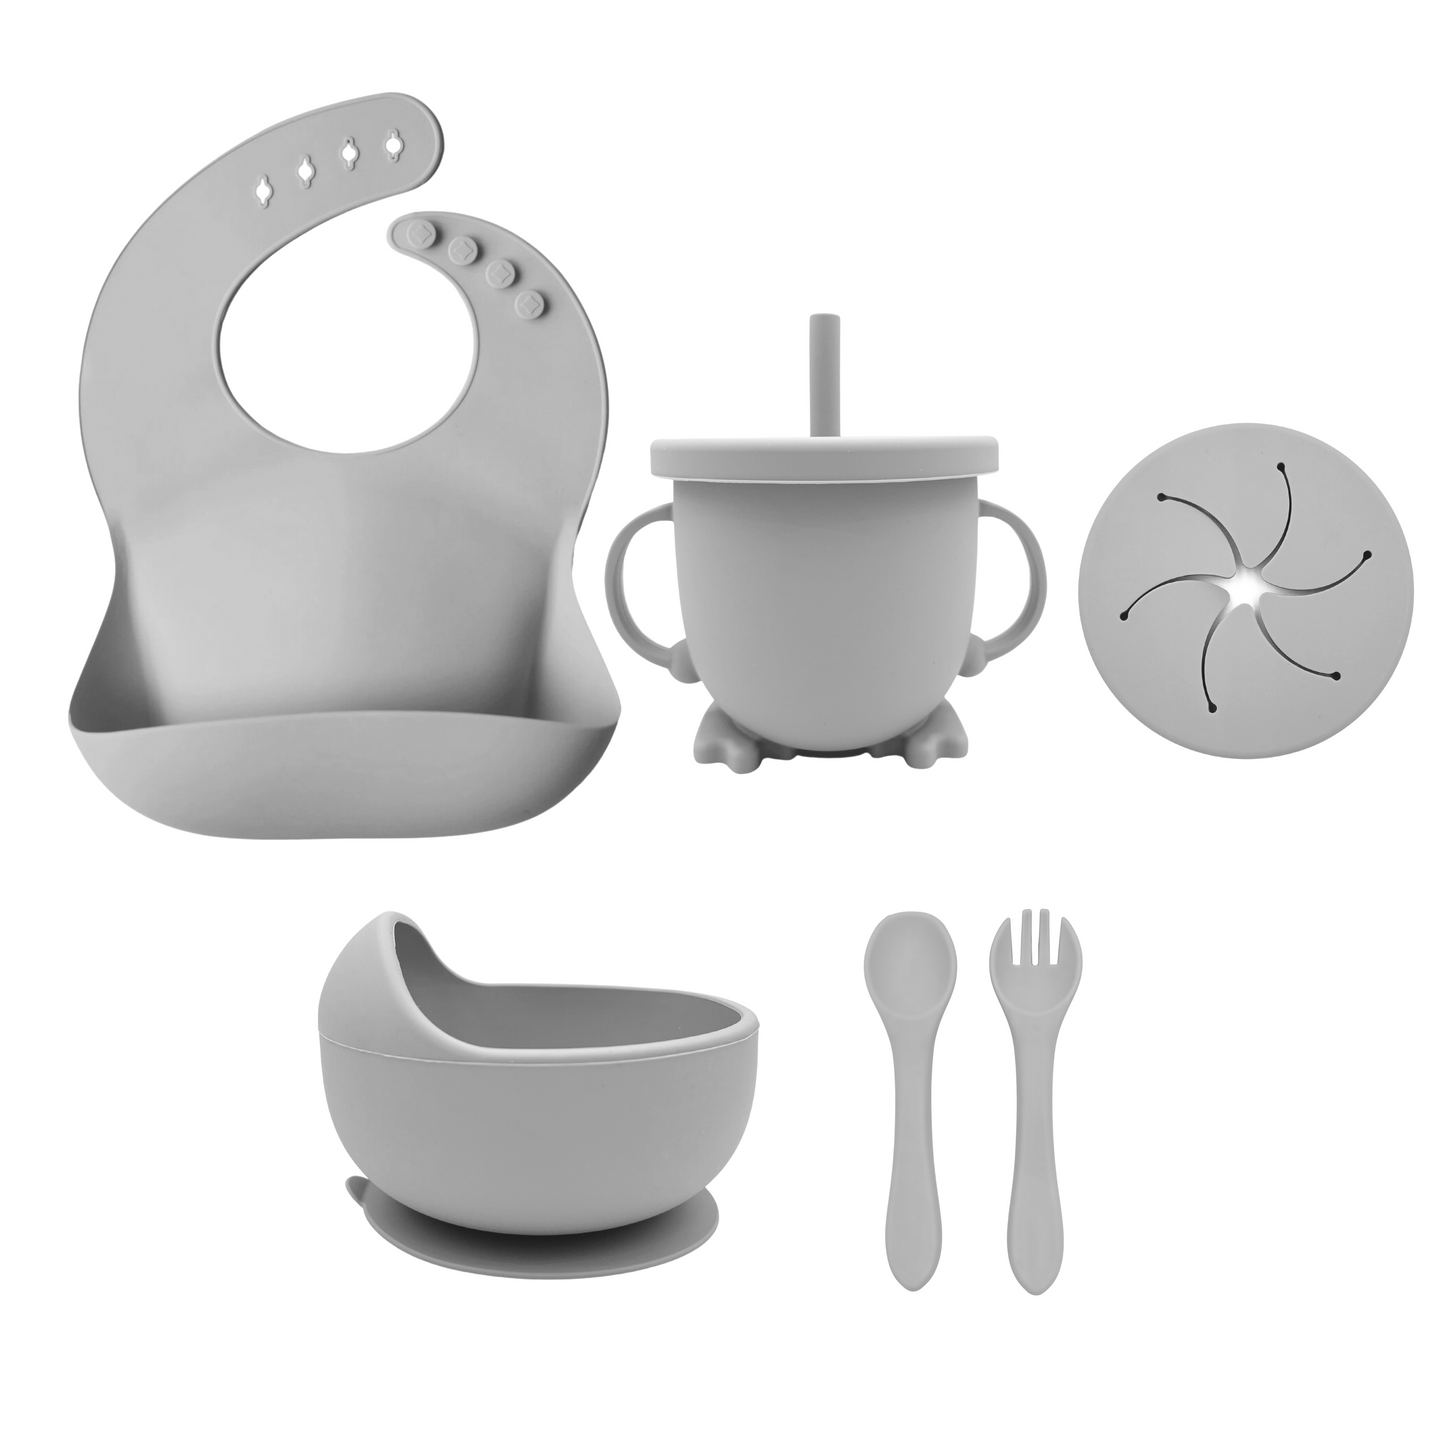 https://thelittleroom.co.za/cdn/shop/products/7-PieceFeedingSet_Bib_SippyCup_Bowl_Spoon_ForkGrey.png?v=1685257813&width=1445